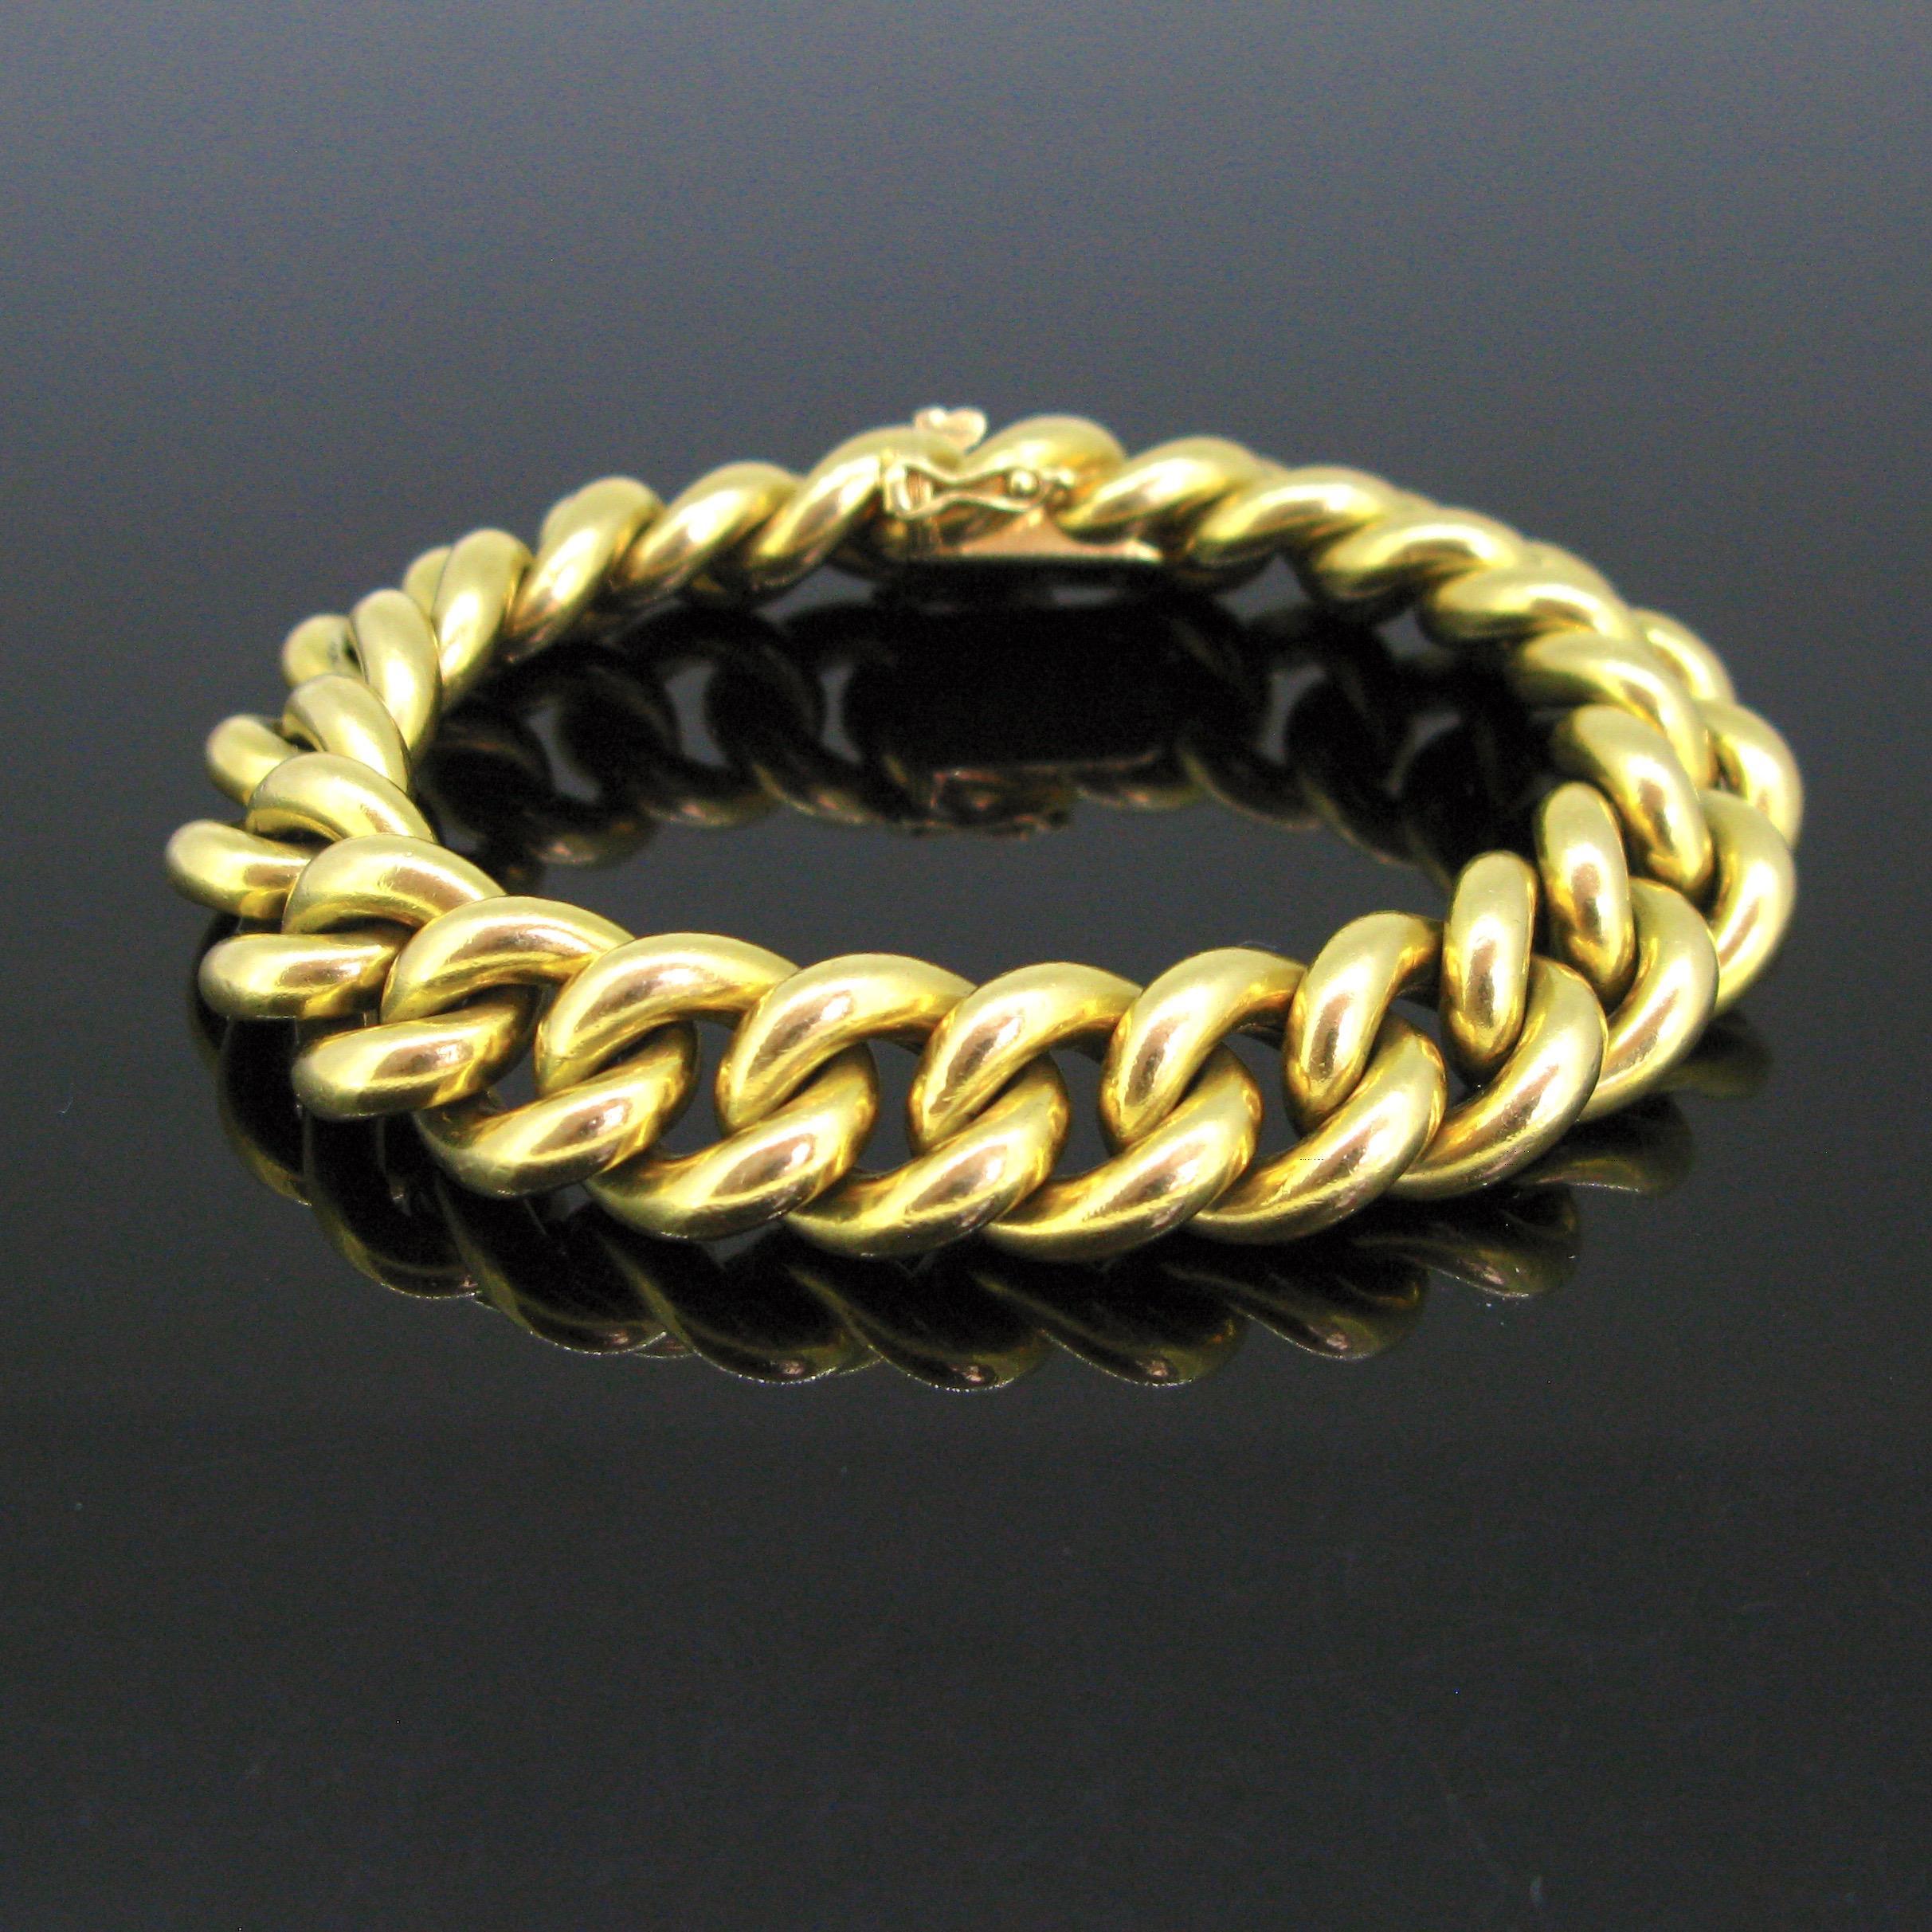 Weight:	67,87gr



Metal:		18kt yellow gold 

	

Condition:	Very good



Comments: 		This curb links bracelet is fully made in 18kt yellow solid gold. The bracelet is 20.5cm / 8in long.  The gold is shiny and smooth. The clasp is marked with 750 for